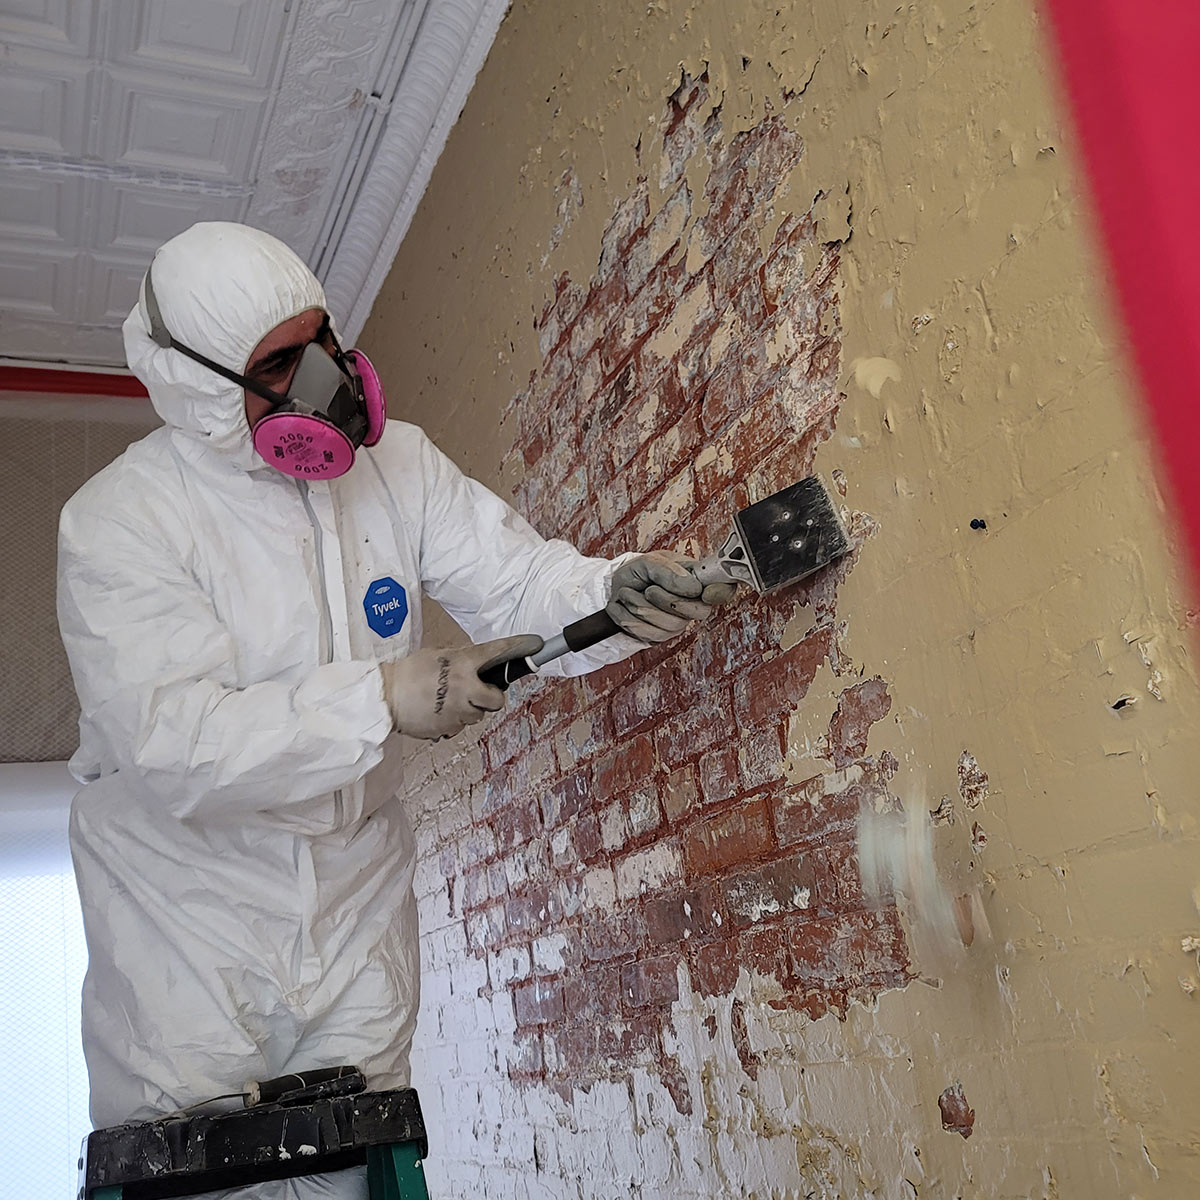 lead abatement in process, scrapping lead paint for removal